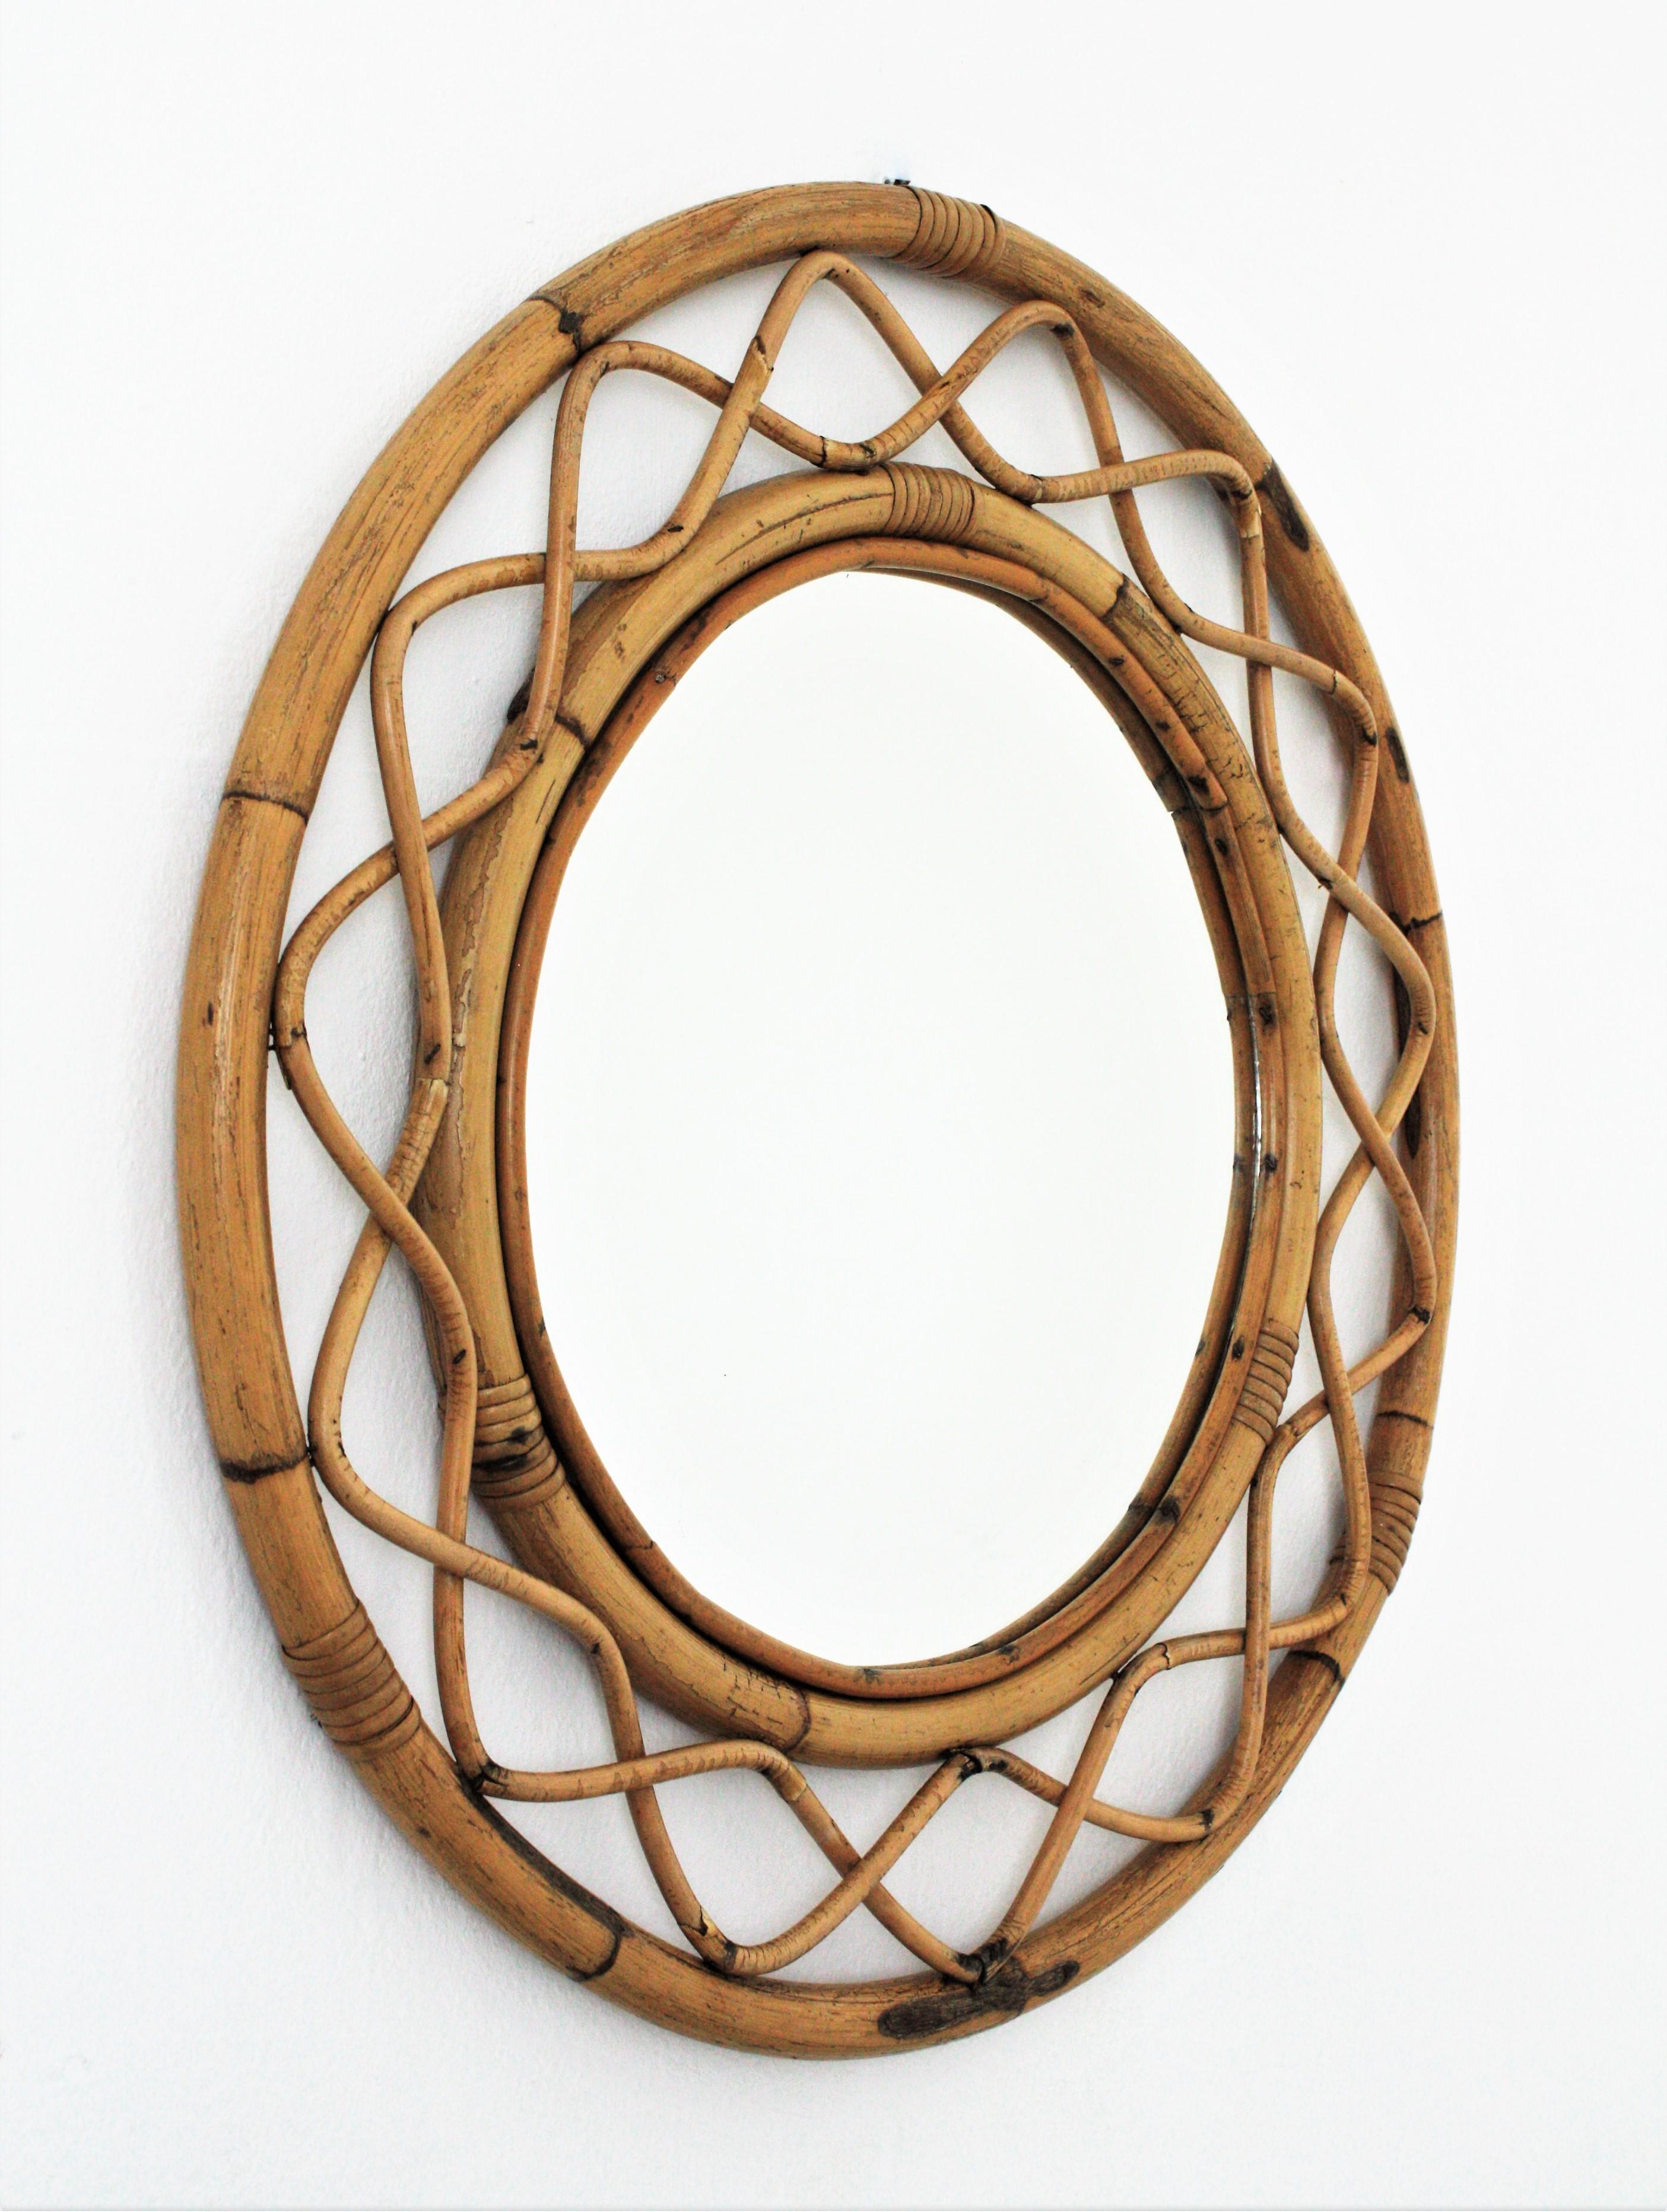 Beautiful bamboo and rattan circular mirror in the style of Franco Albini, France, 1960s.
This wall mirror features two concentric bamboo frames with an intrincate undulated rattan pattern between them.
Place it in a country house, beach house